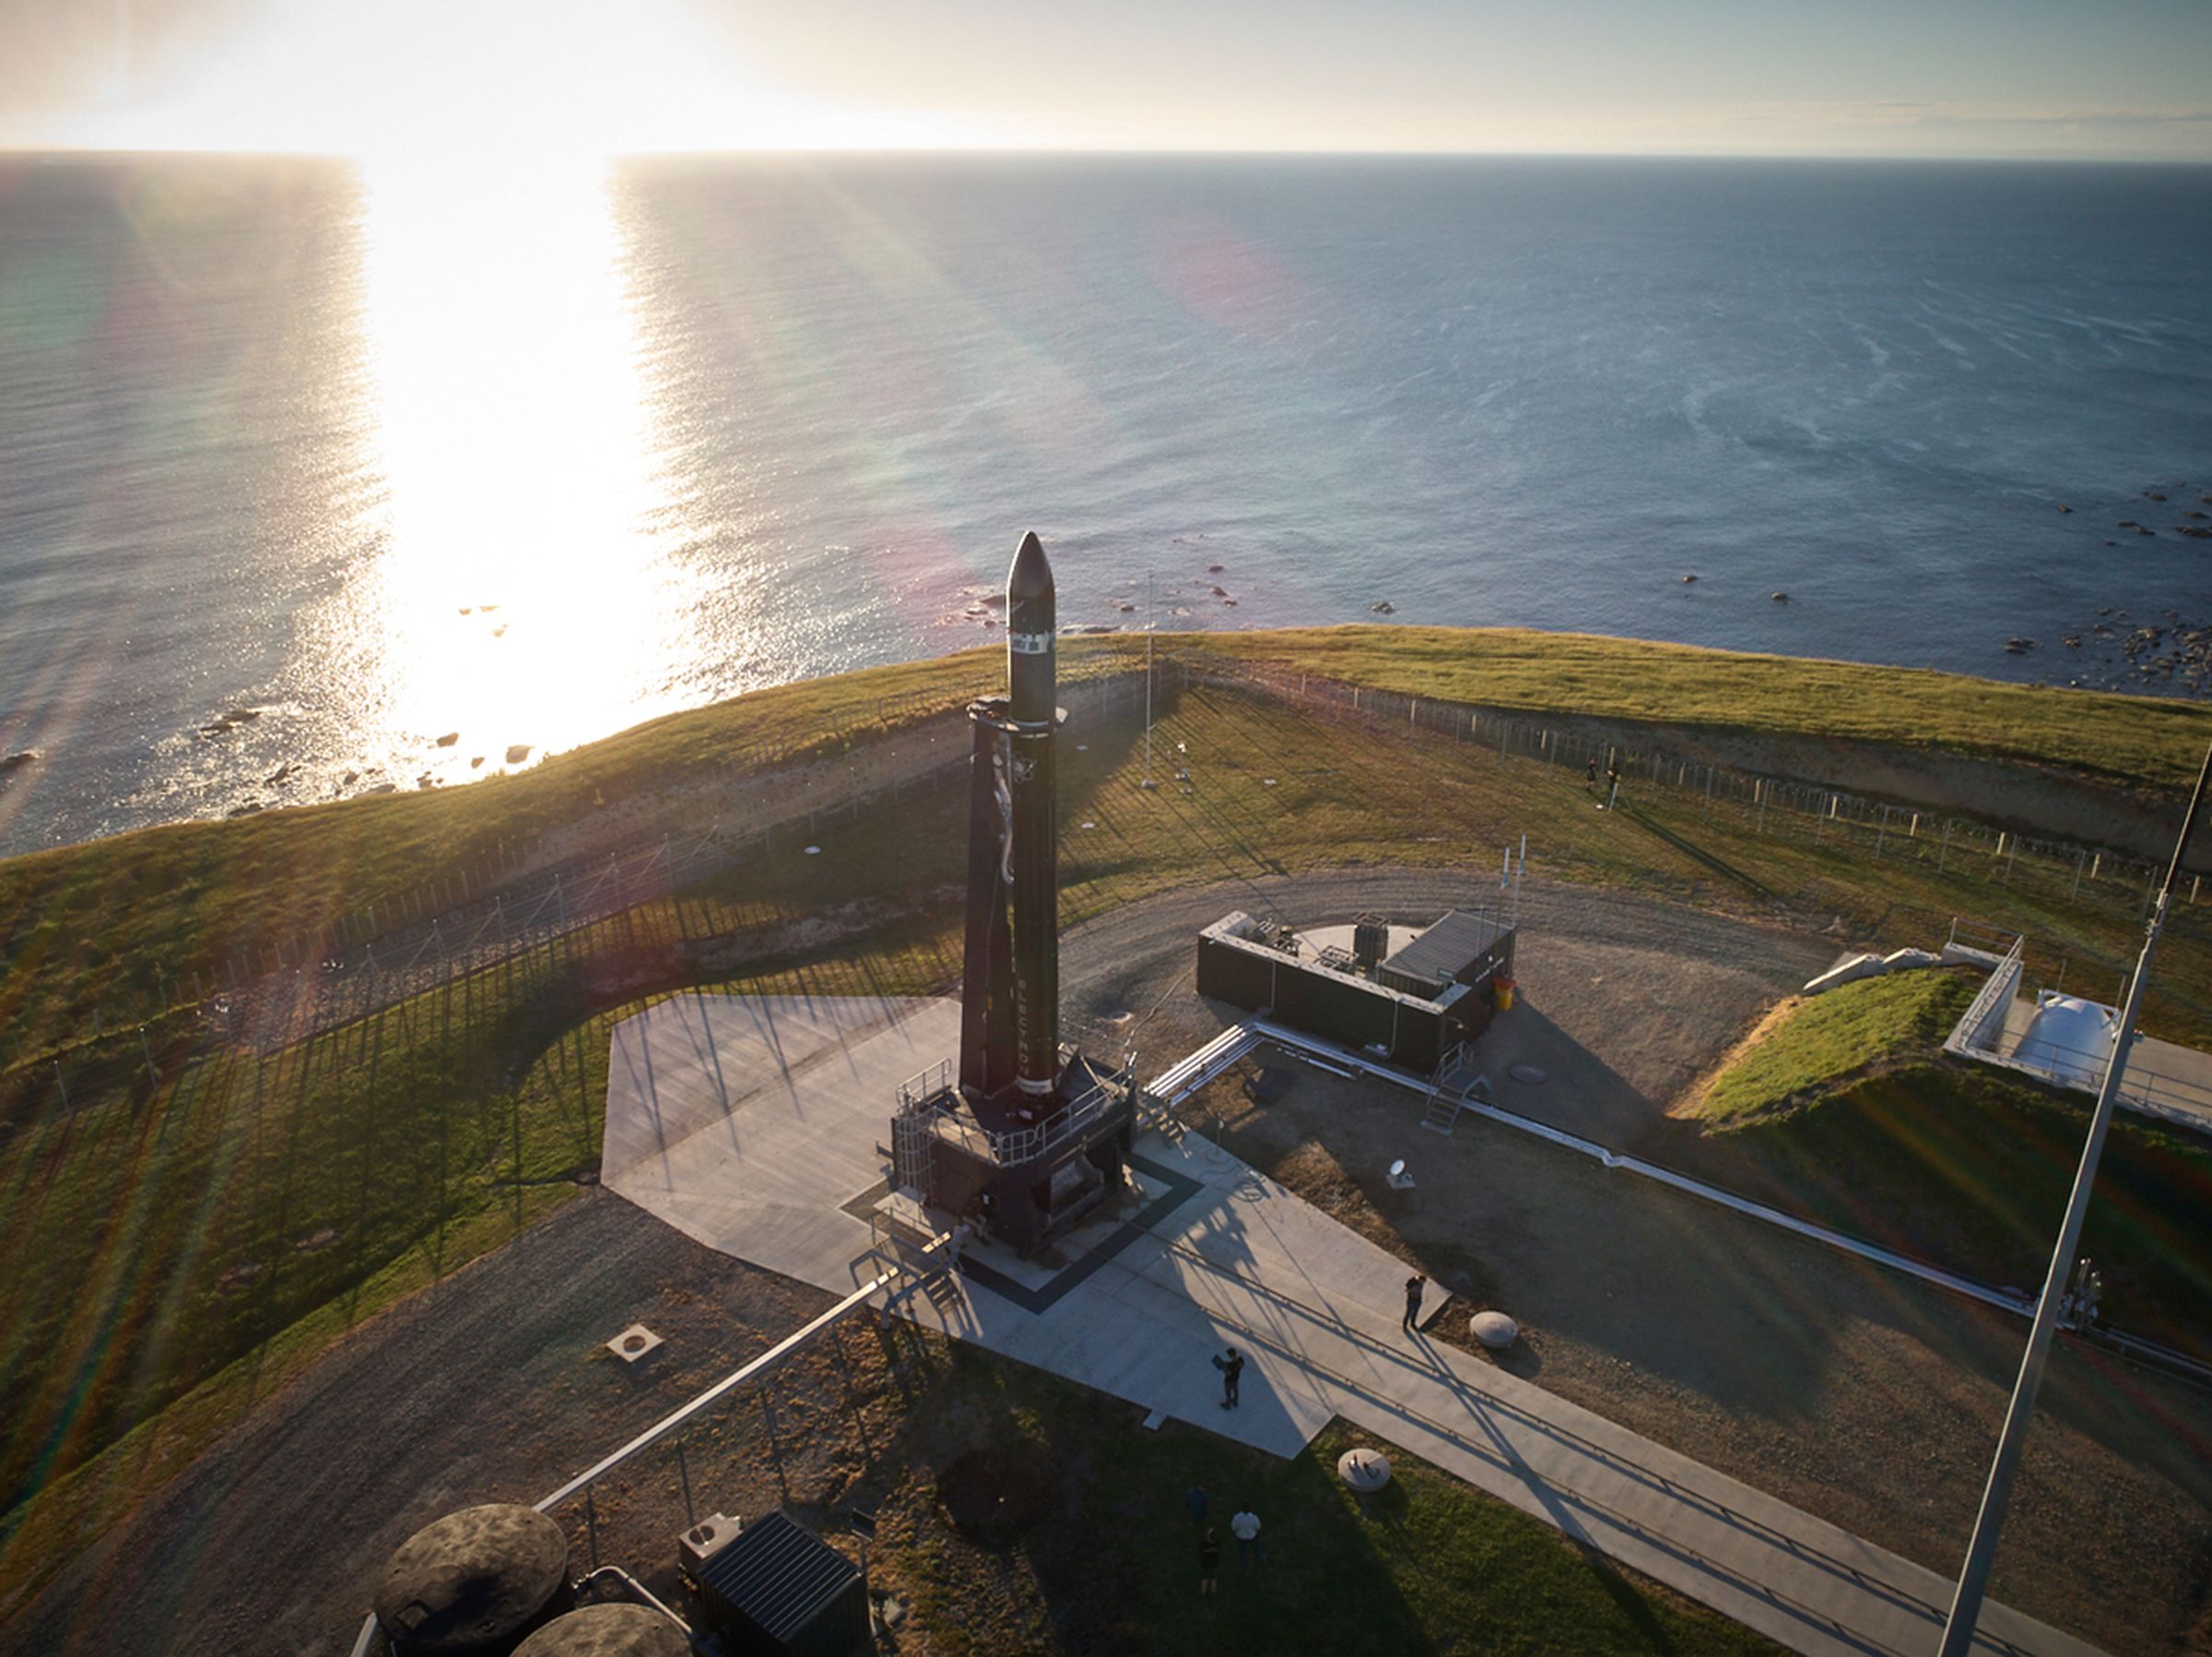 Rocket Lab’s Electron test rocket on the company’s New Zealand launch pad.